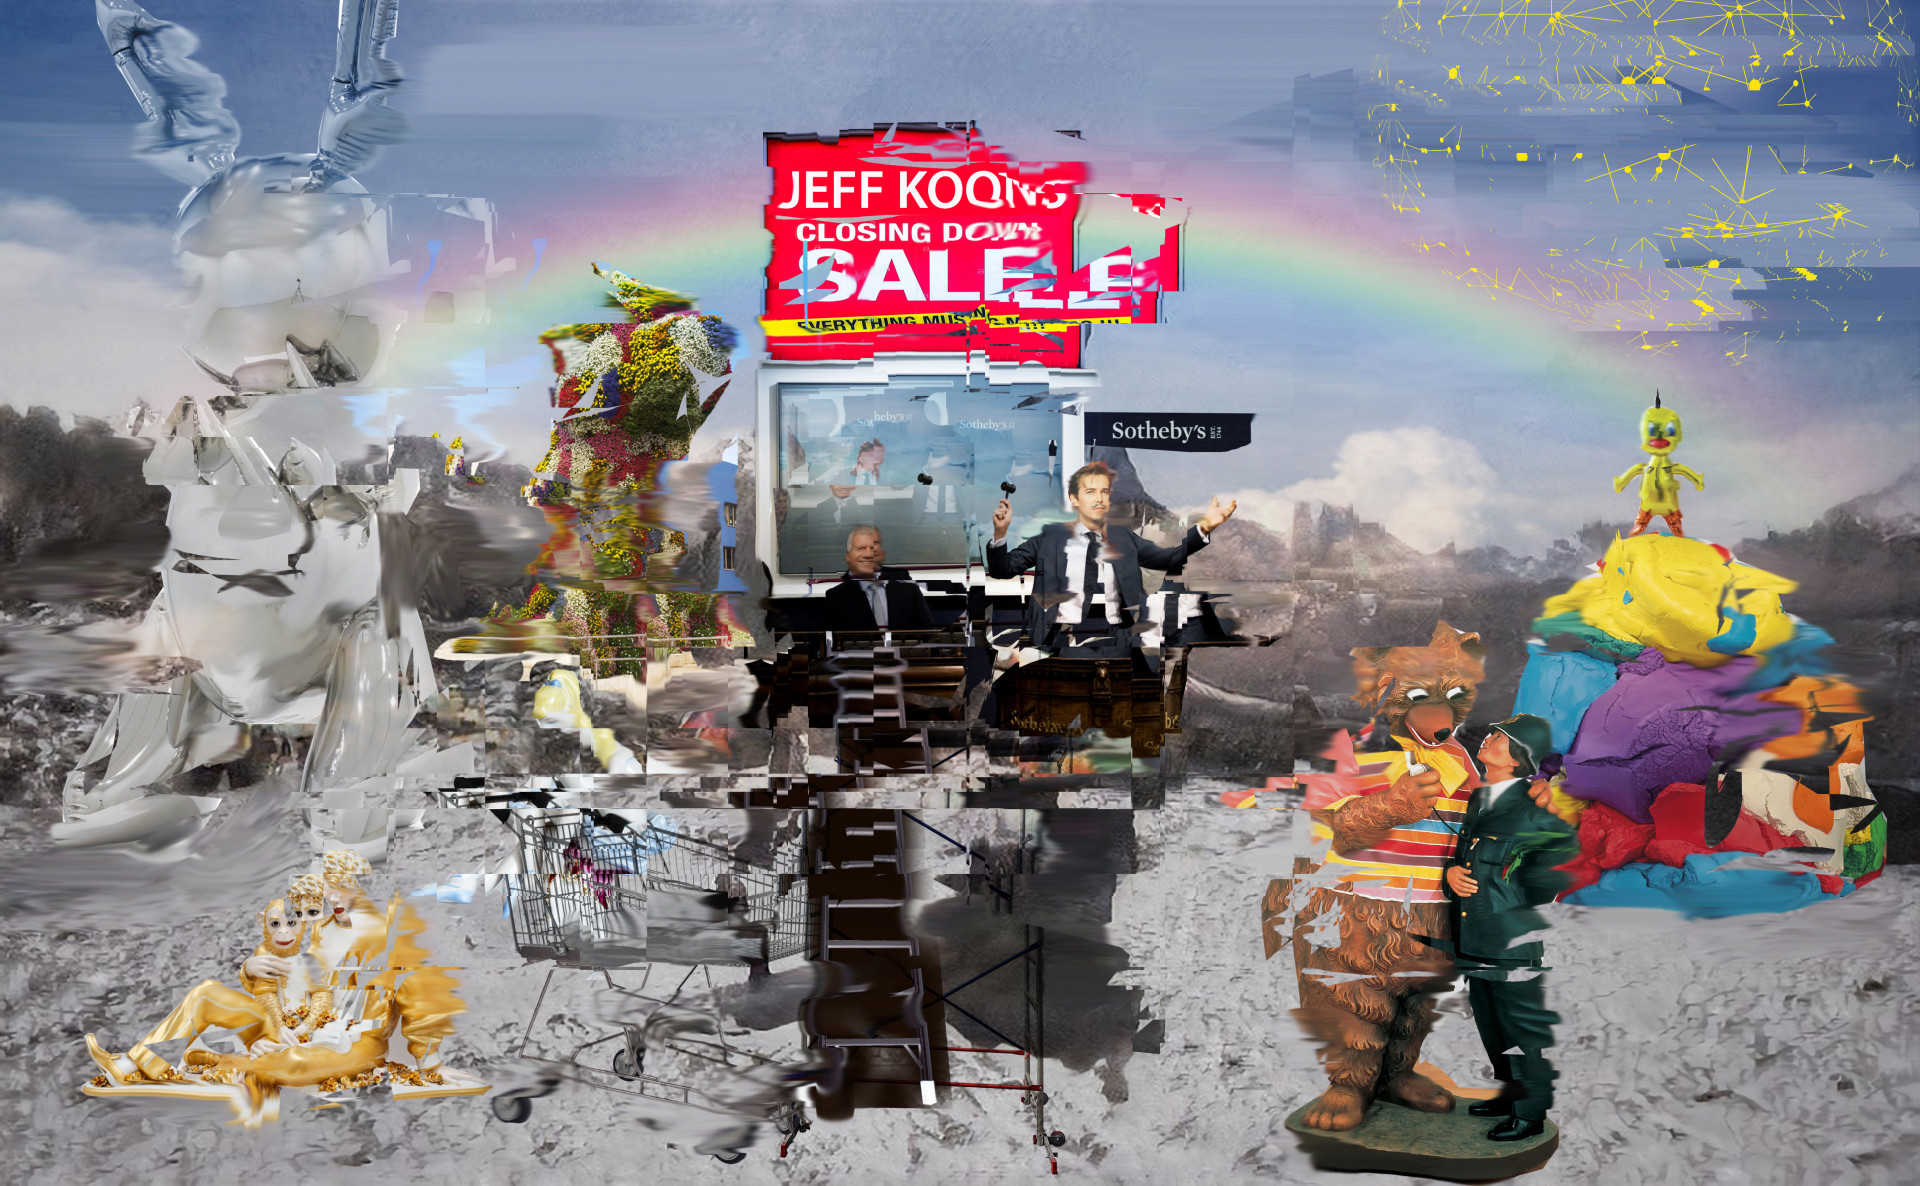 A collage depicting an imaginary fire sale of sculptures by Jeff Koons; the works are distorted, and placed on a gray wasteland with mountains and a rainbow in the background